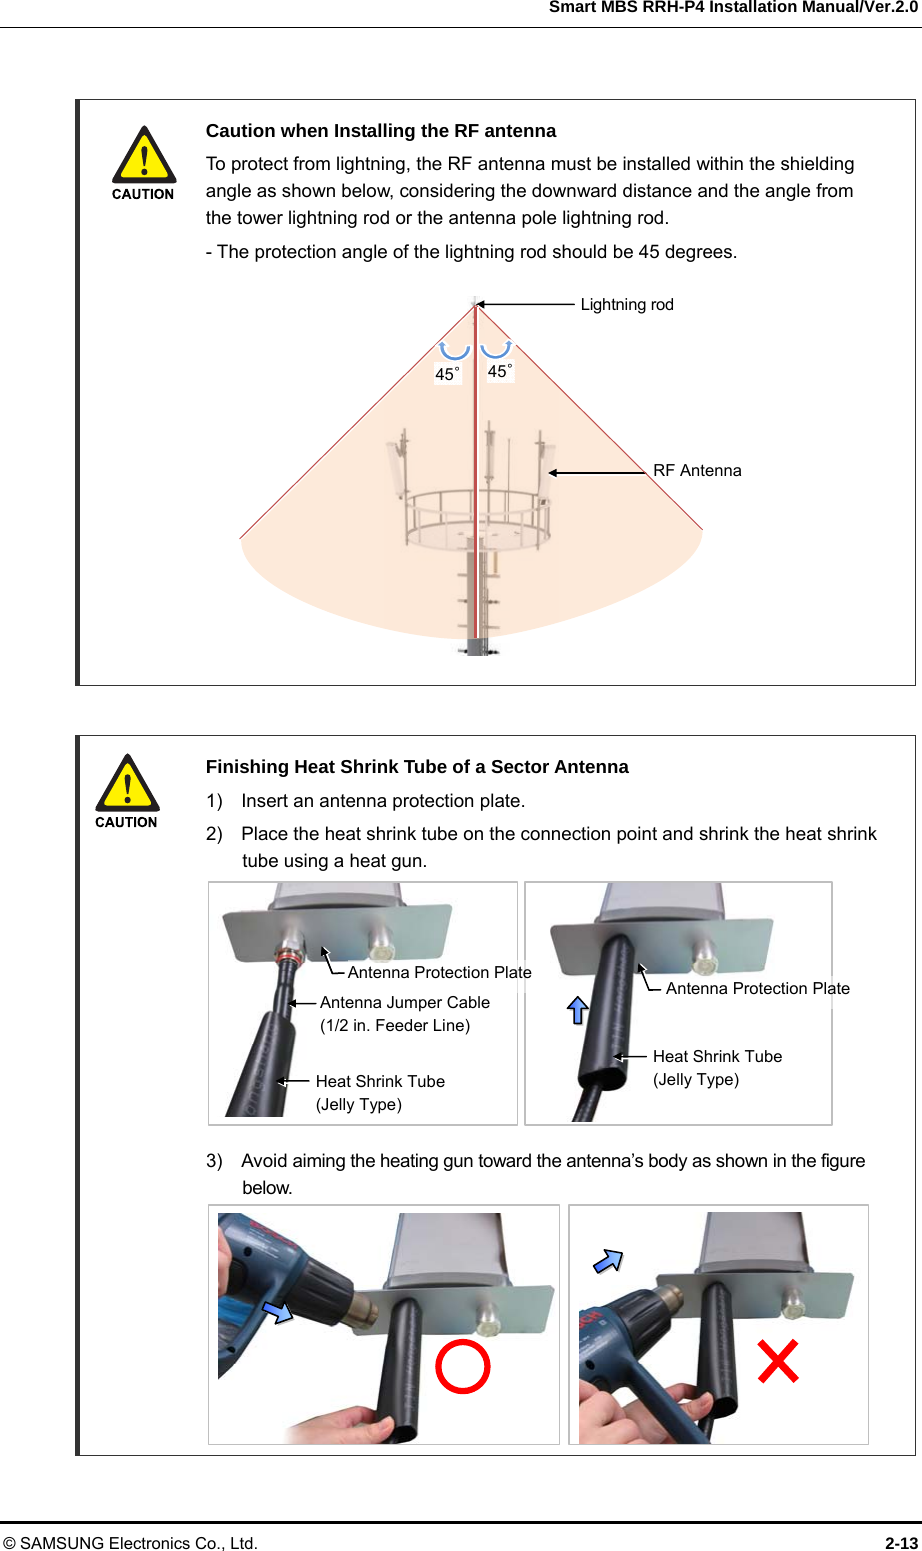  Smart MBS RRH-P4 Installation Manual/Ver.2.0 © SAMSUNG Electronics Co., Ltd.  2-13   Caution when Installing the RF antenna   To protect from lightning, the RF antenna must be installed within the shielding angle as shown below, considering the downward distance and the angle from the tower lightning rod or the antenna pole lightning rod.     - The protection angle of the lightning rod should be 45 degrees.                Finishing Heat Shrink Tube of a Sector Antenna   1)  Insert an antenna protection plate.   2)    Place the heat shrink tube on the connection point and shrink the heat shrink tube using a heat gun.           3)    Avoid aiming the heating gun toward the antenna’s body as shown in the figure below.        Lightning rod 45°45°RF Antenna Heat Shrink Tube (Jelly Type) Antenna Jumper Cable(1/2 in. Feeder Line) Heat Shrink Tube (Jelly Type) Antenna Protection PlateAntenna Protection Plate